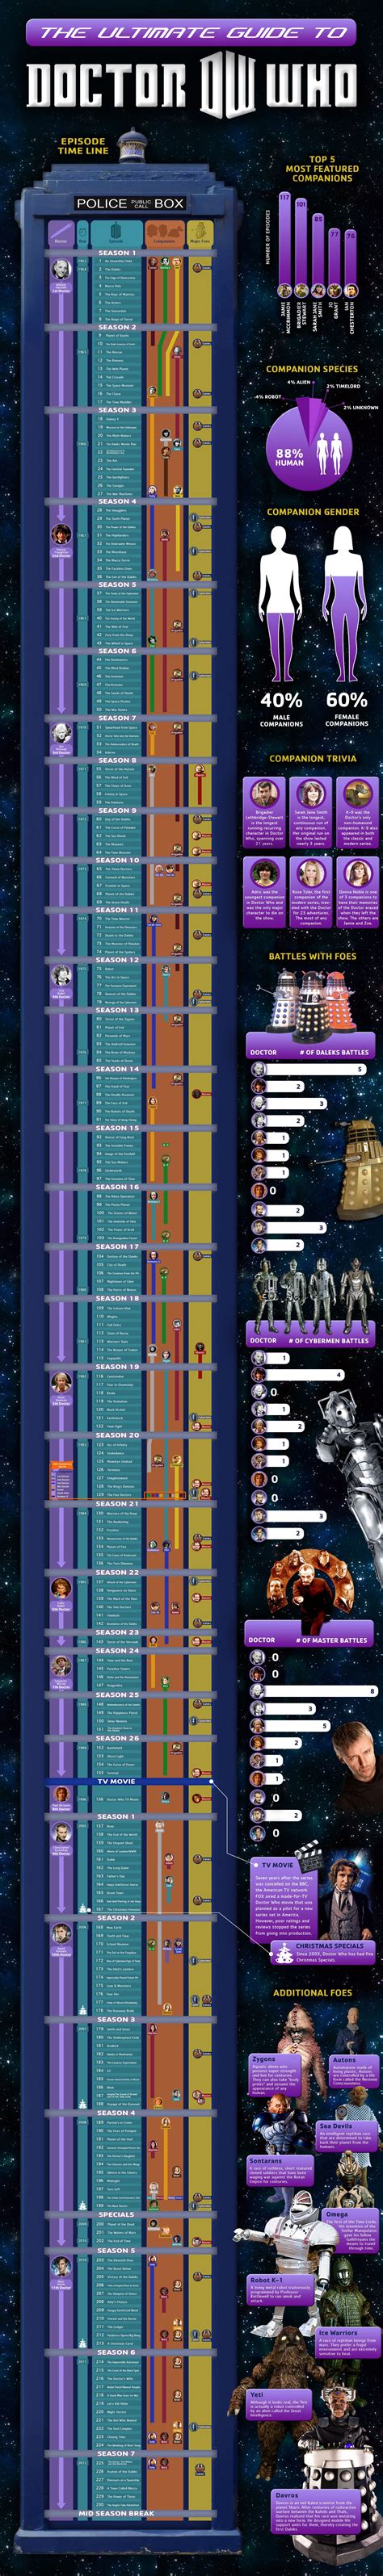 The Ultimate Guide To Doctor Who Infographic Best Infographics